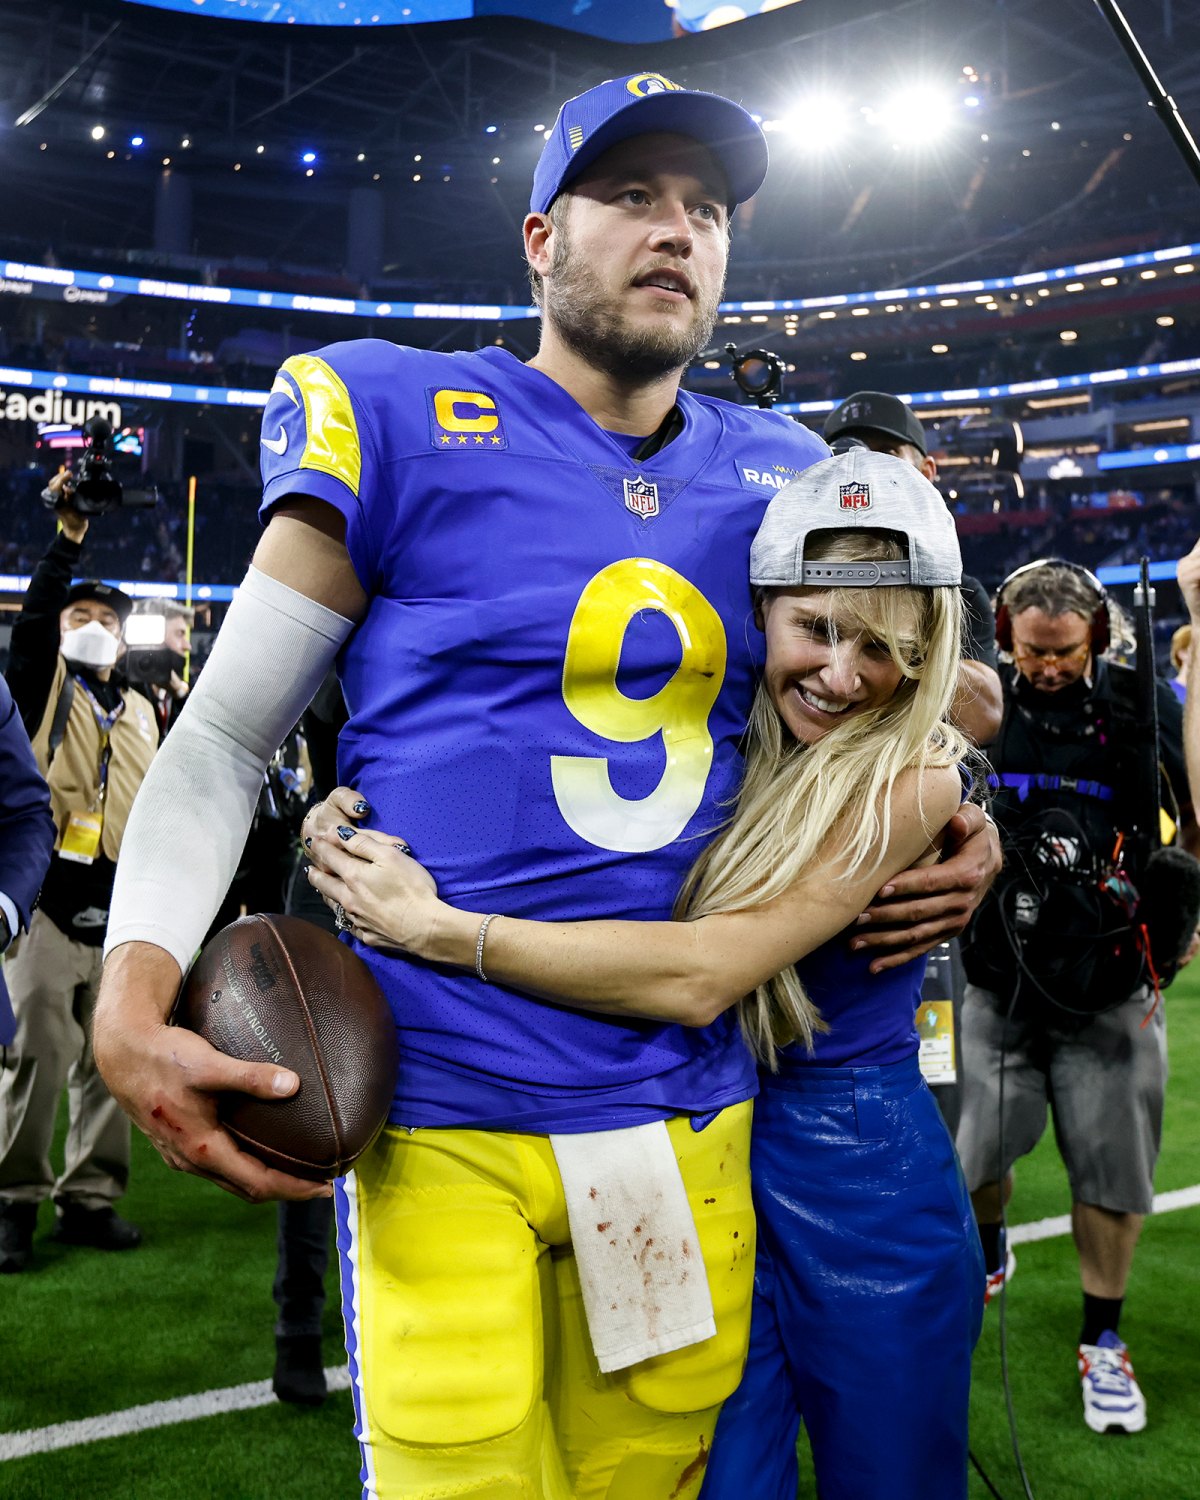 How Matthew Stafford handled wife Kelly's locker room comments